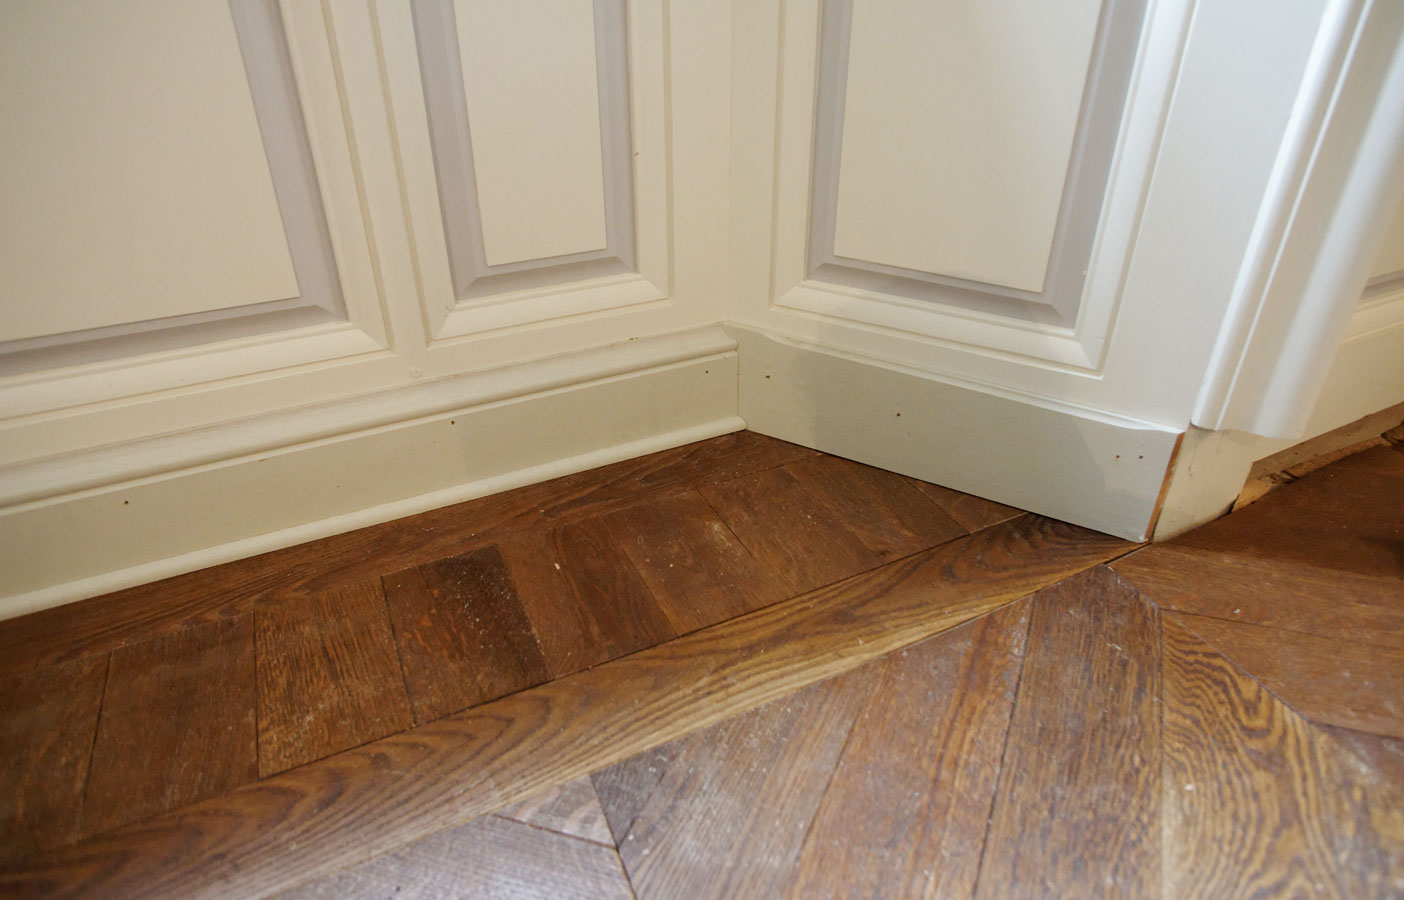 Parquet floor with an old apperence